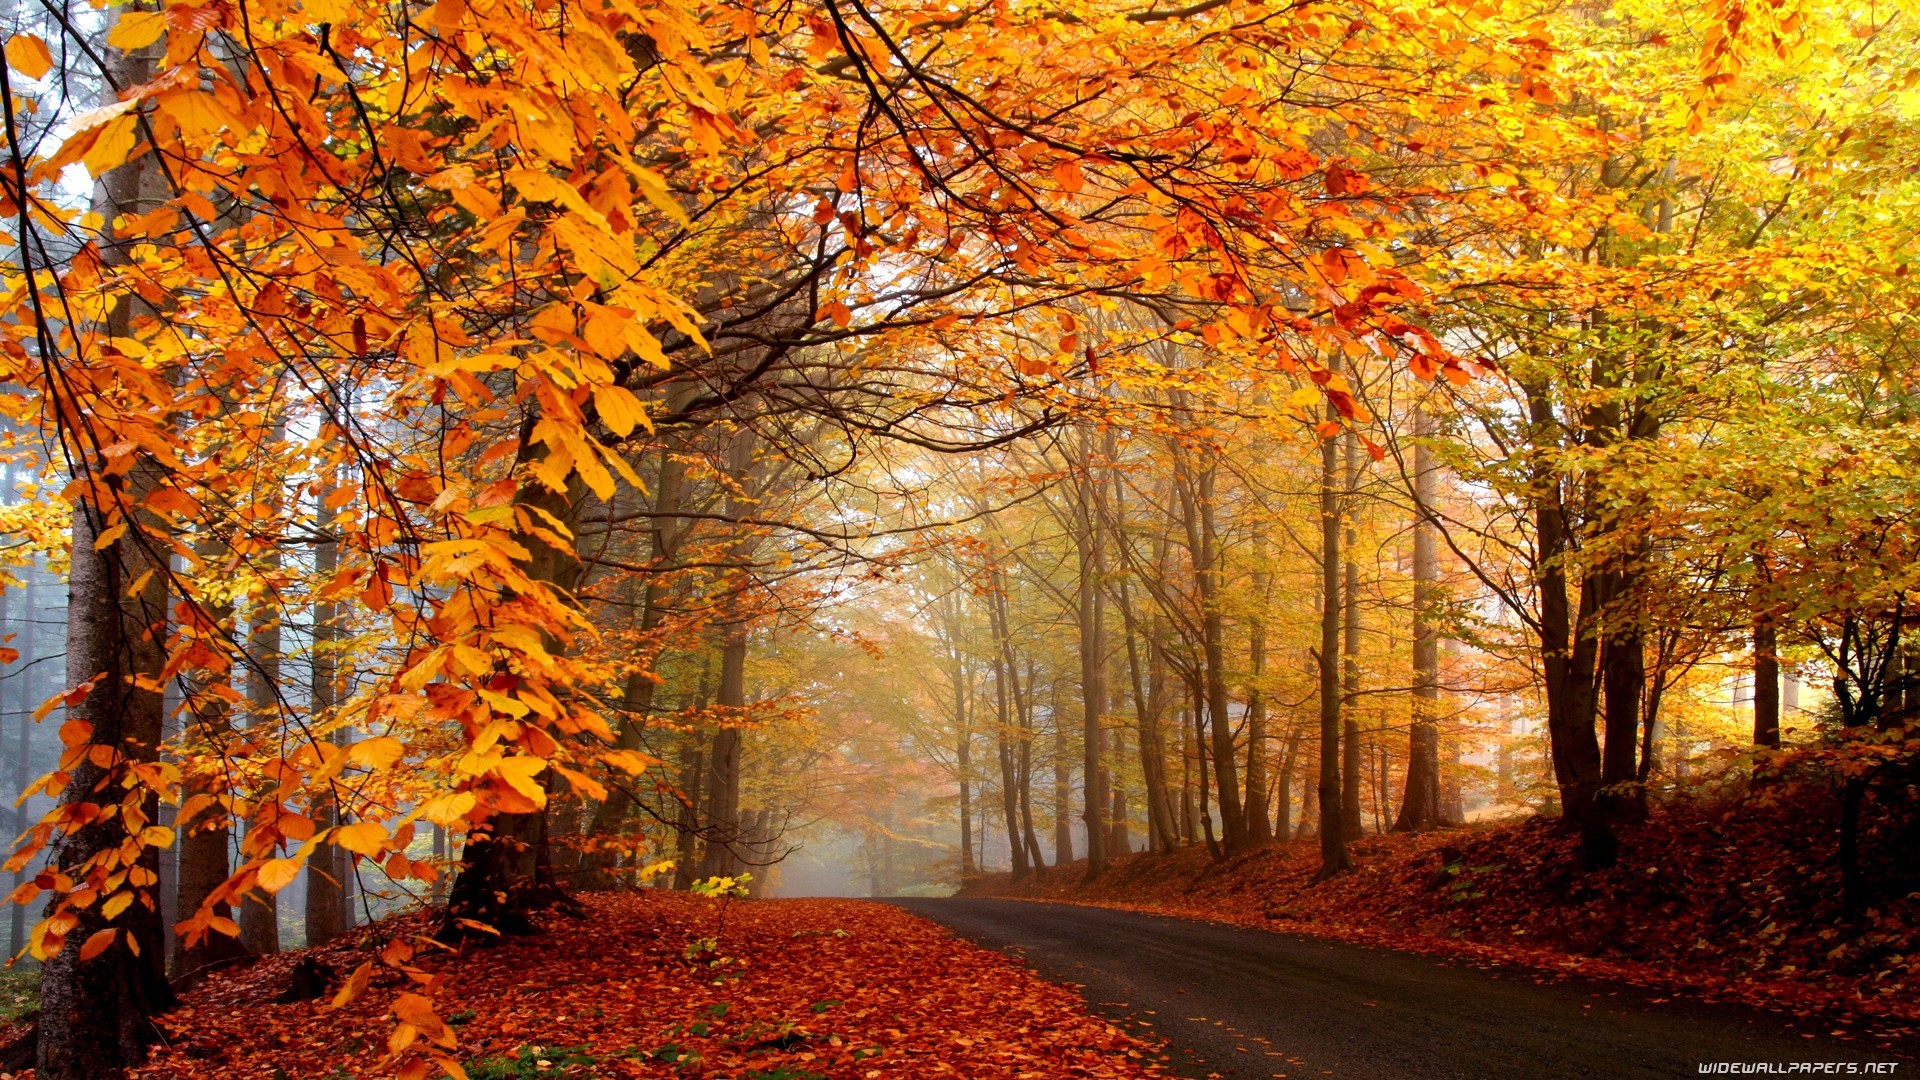 General 1920x1080 road fall trees leaves outdoors nature